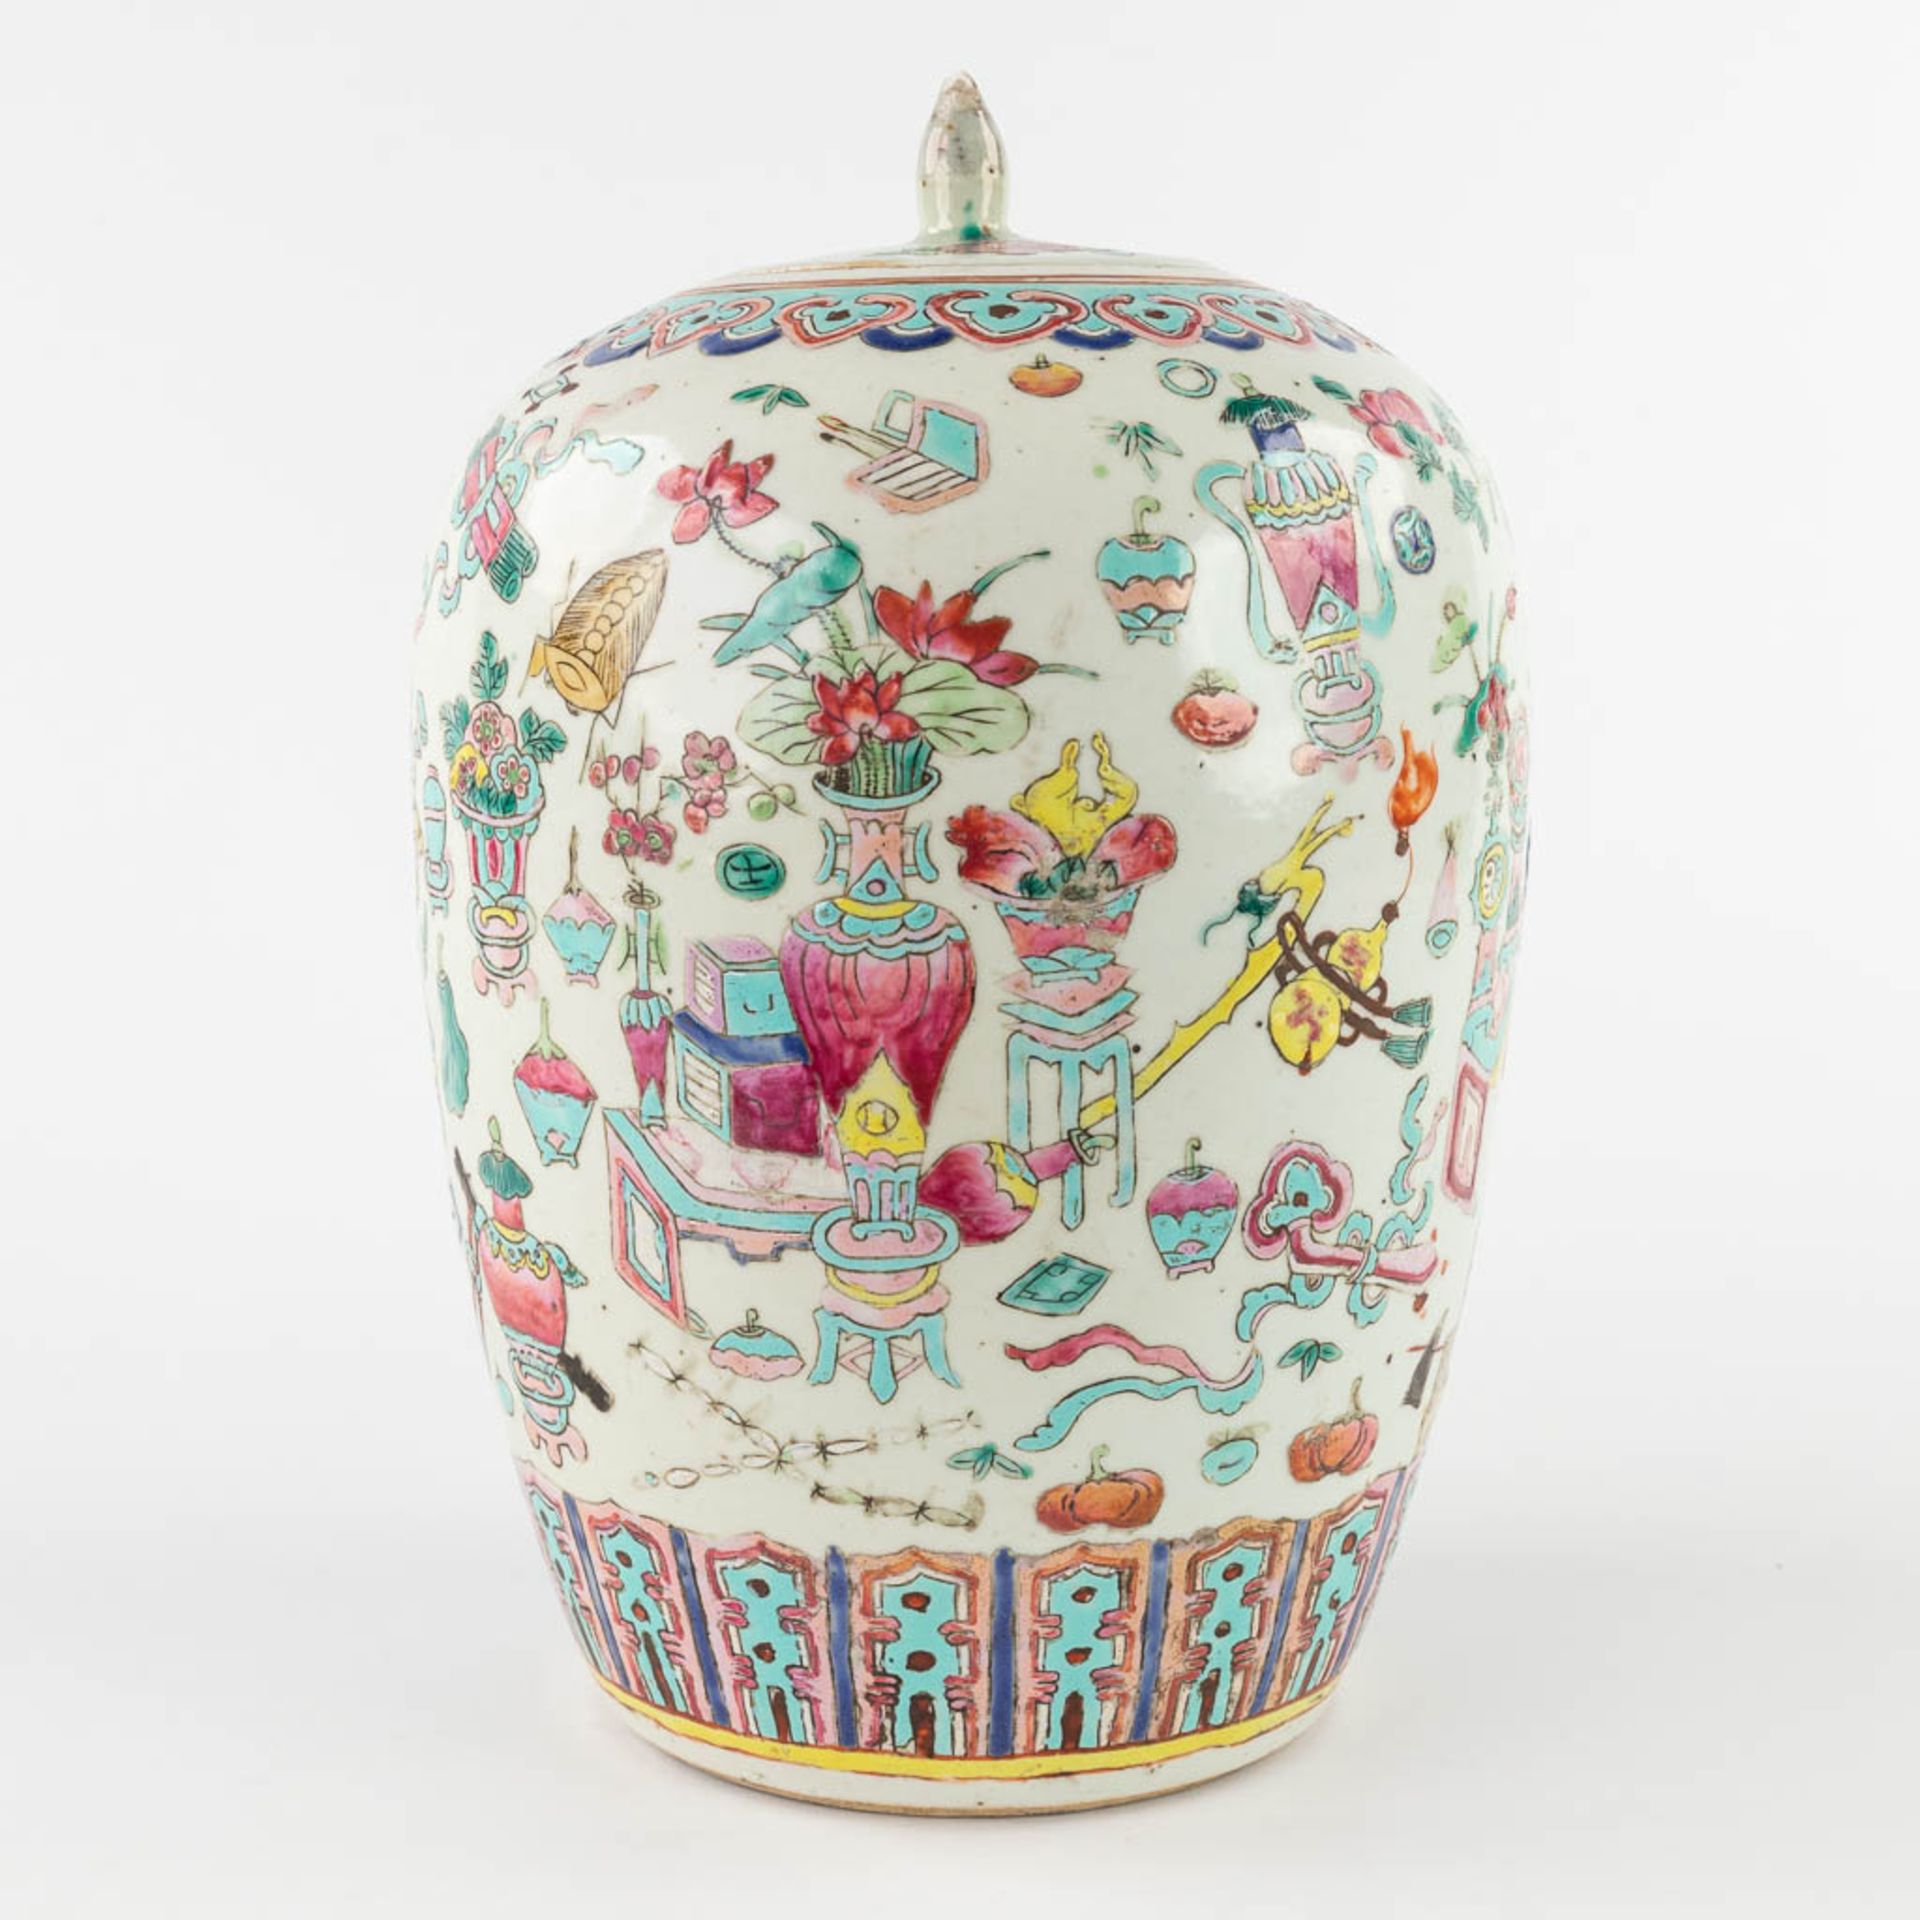 A Chinese Famille Rose ginger jar, decorated with 100 antiquities. 19th/20th C. (H:30 x D:21 cm) - Image 6 of 16